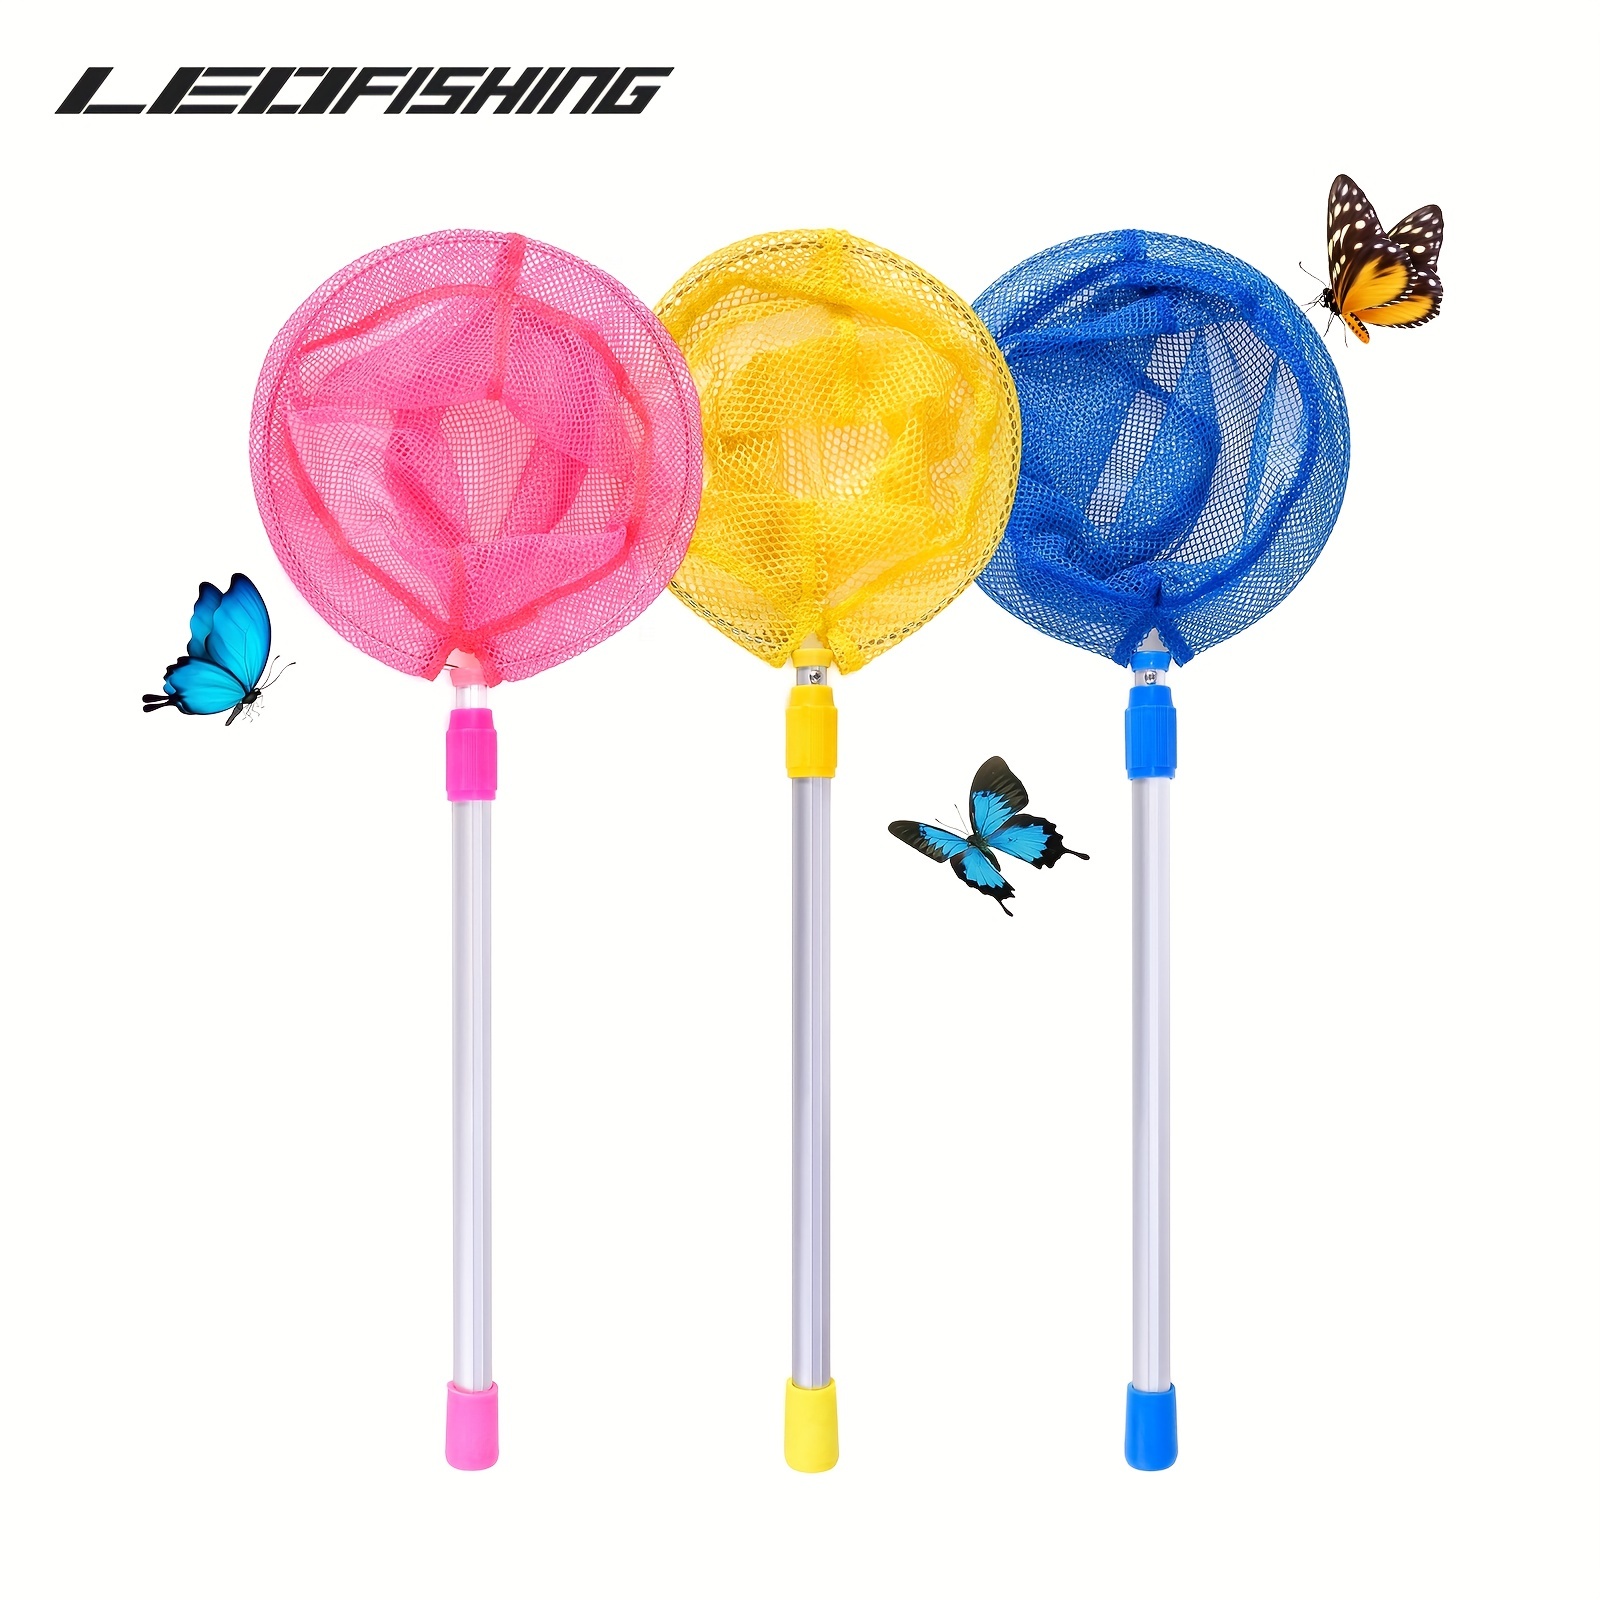 Kids Telescopic Butterfly Fishing Nets Great For Catching Insects